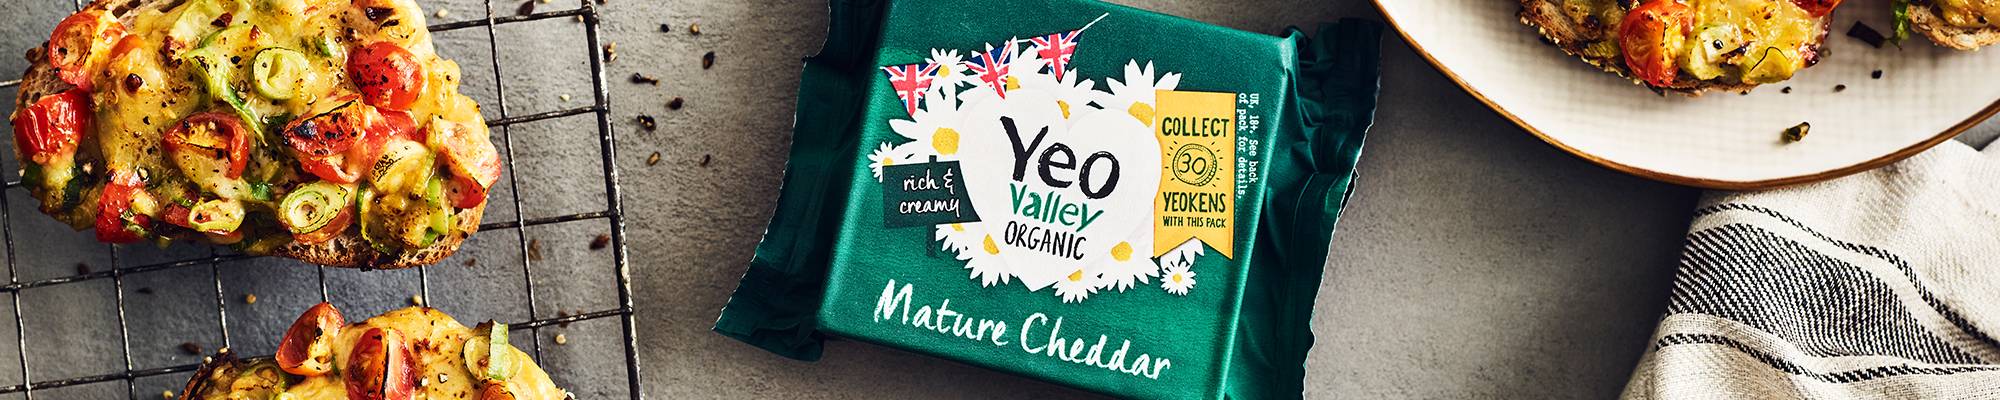 Yeo Valley Organic Mature Cheddar Cheese